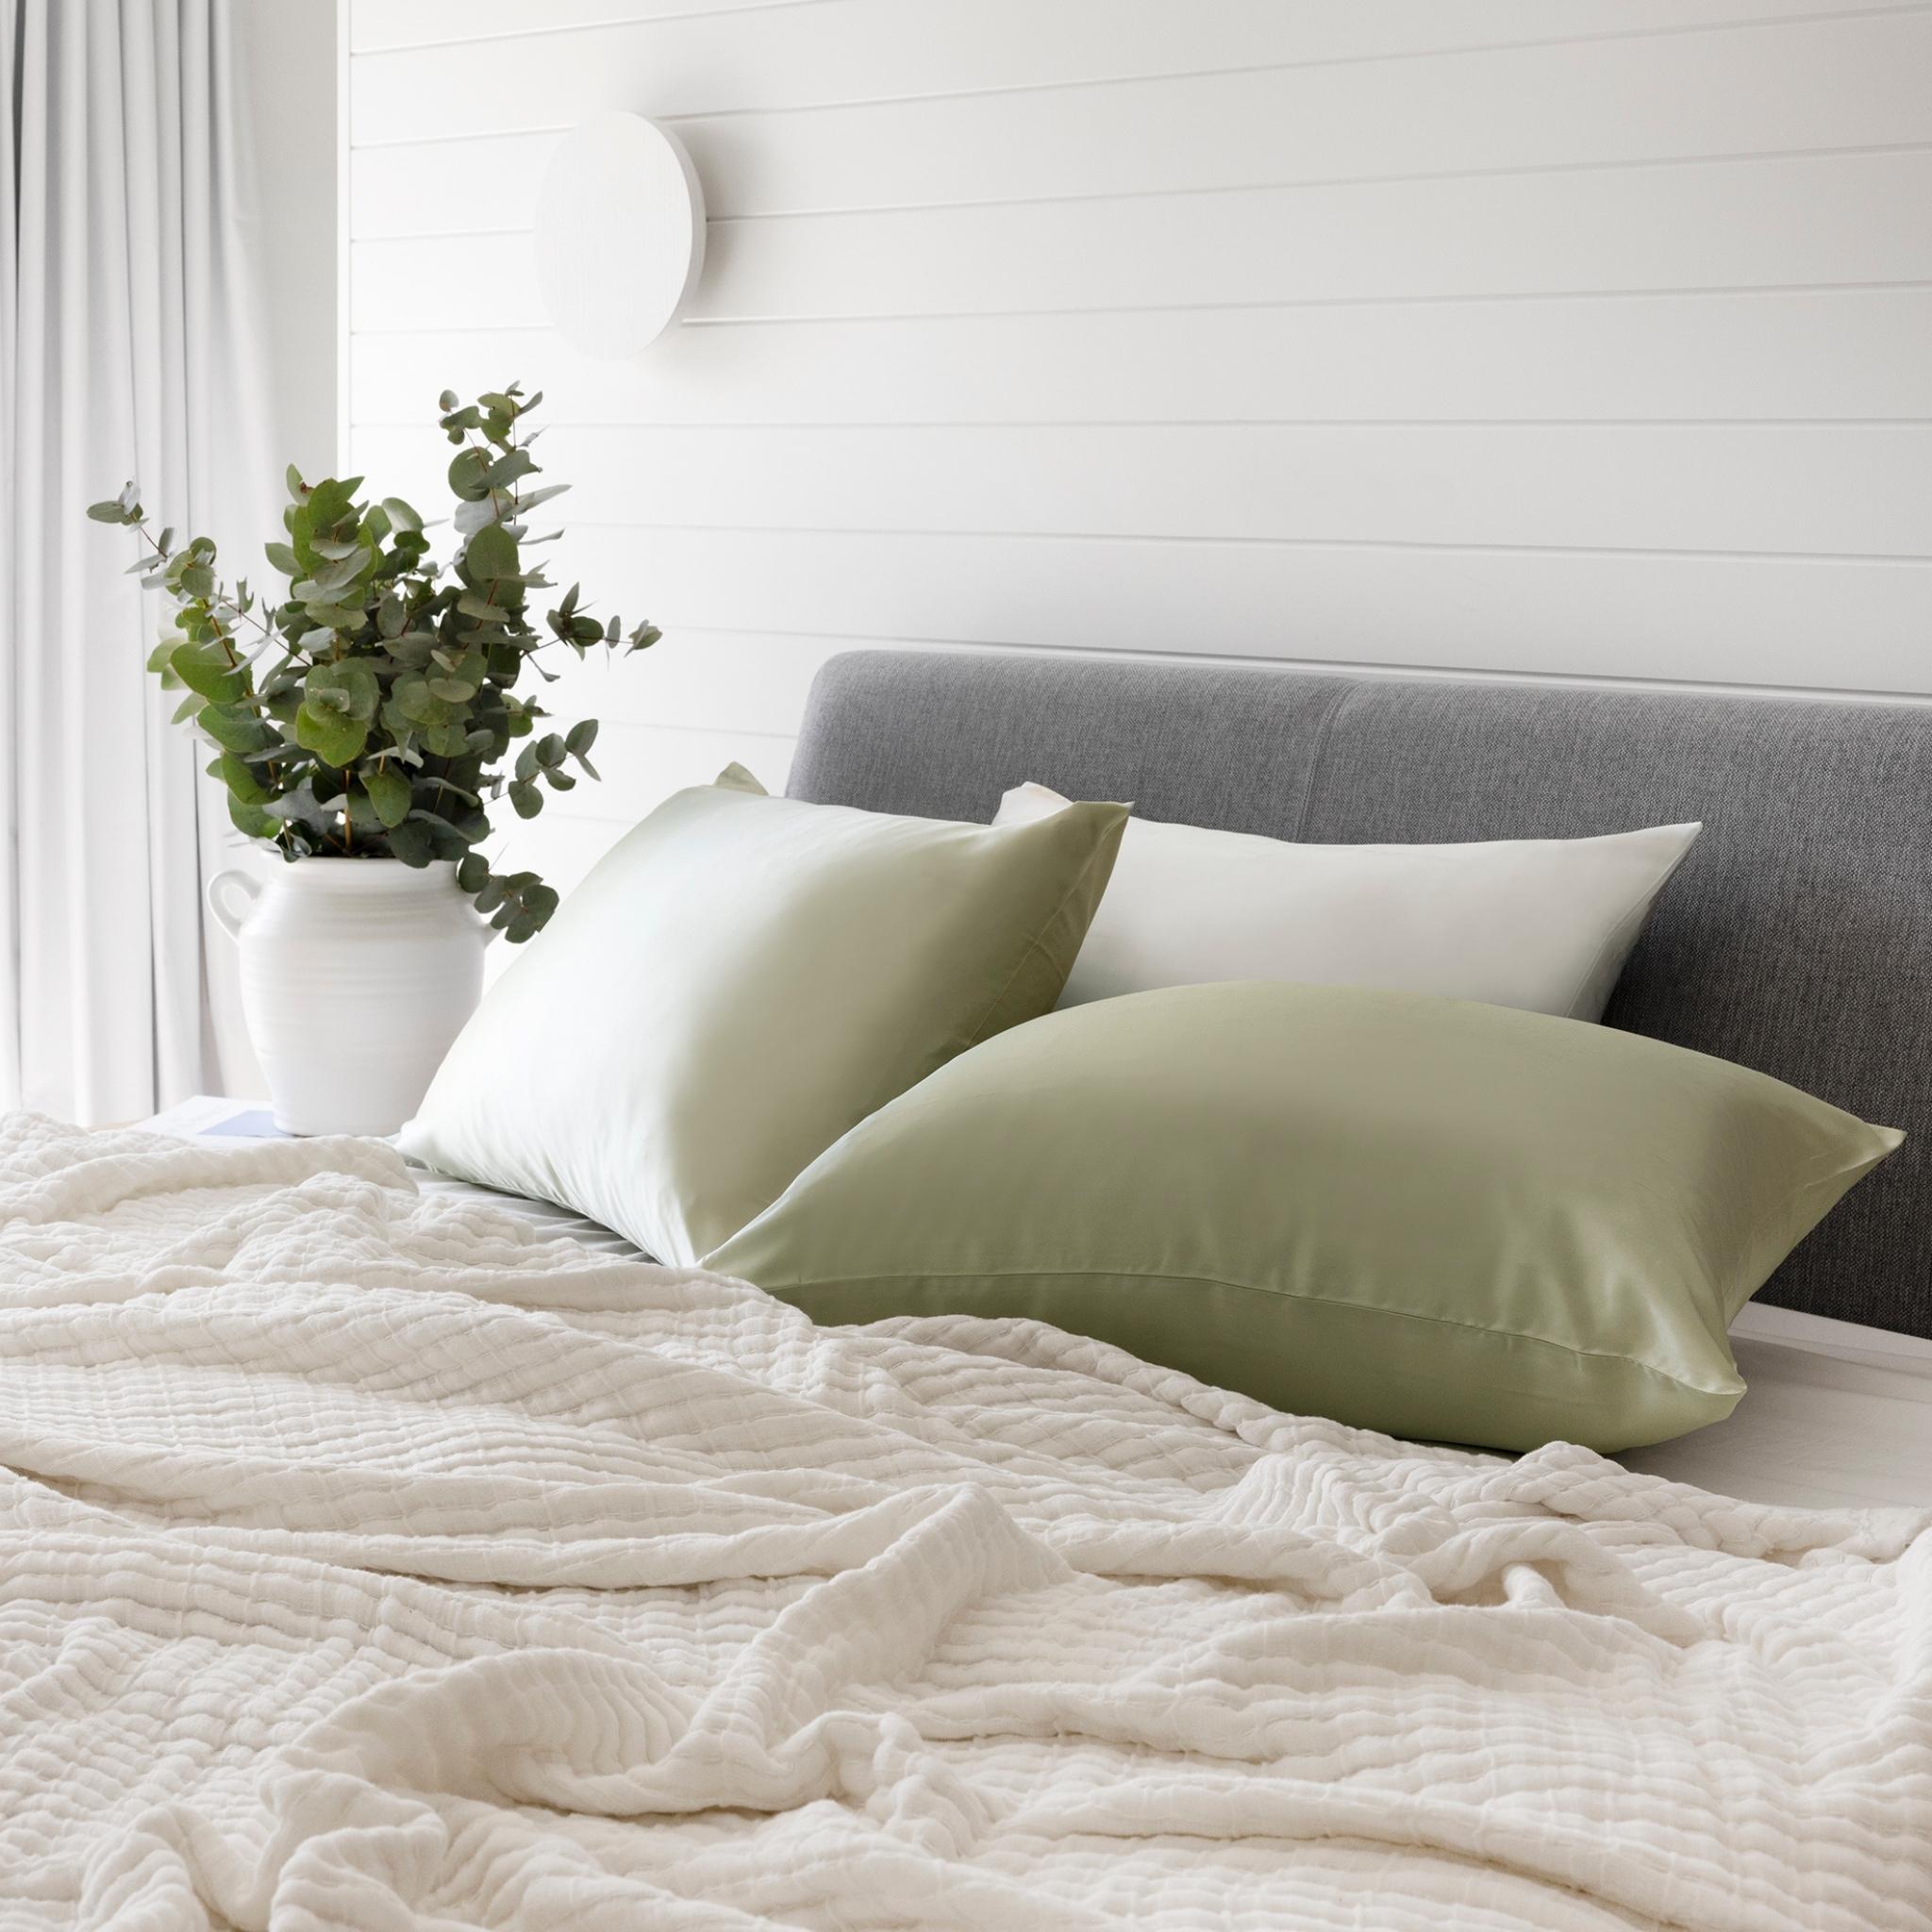 Twin Set Sage Green 100% Silk Pillowcase infused with Hyaluronic Acid and Argan Oil. - Lunalux